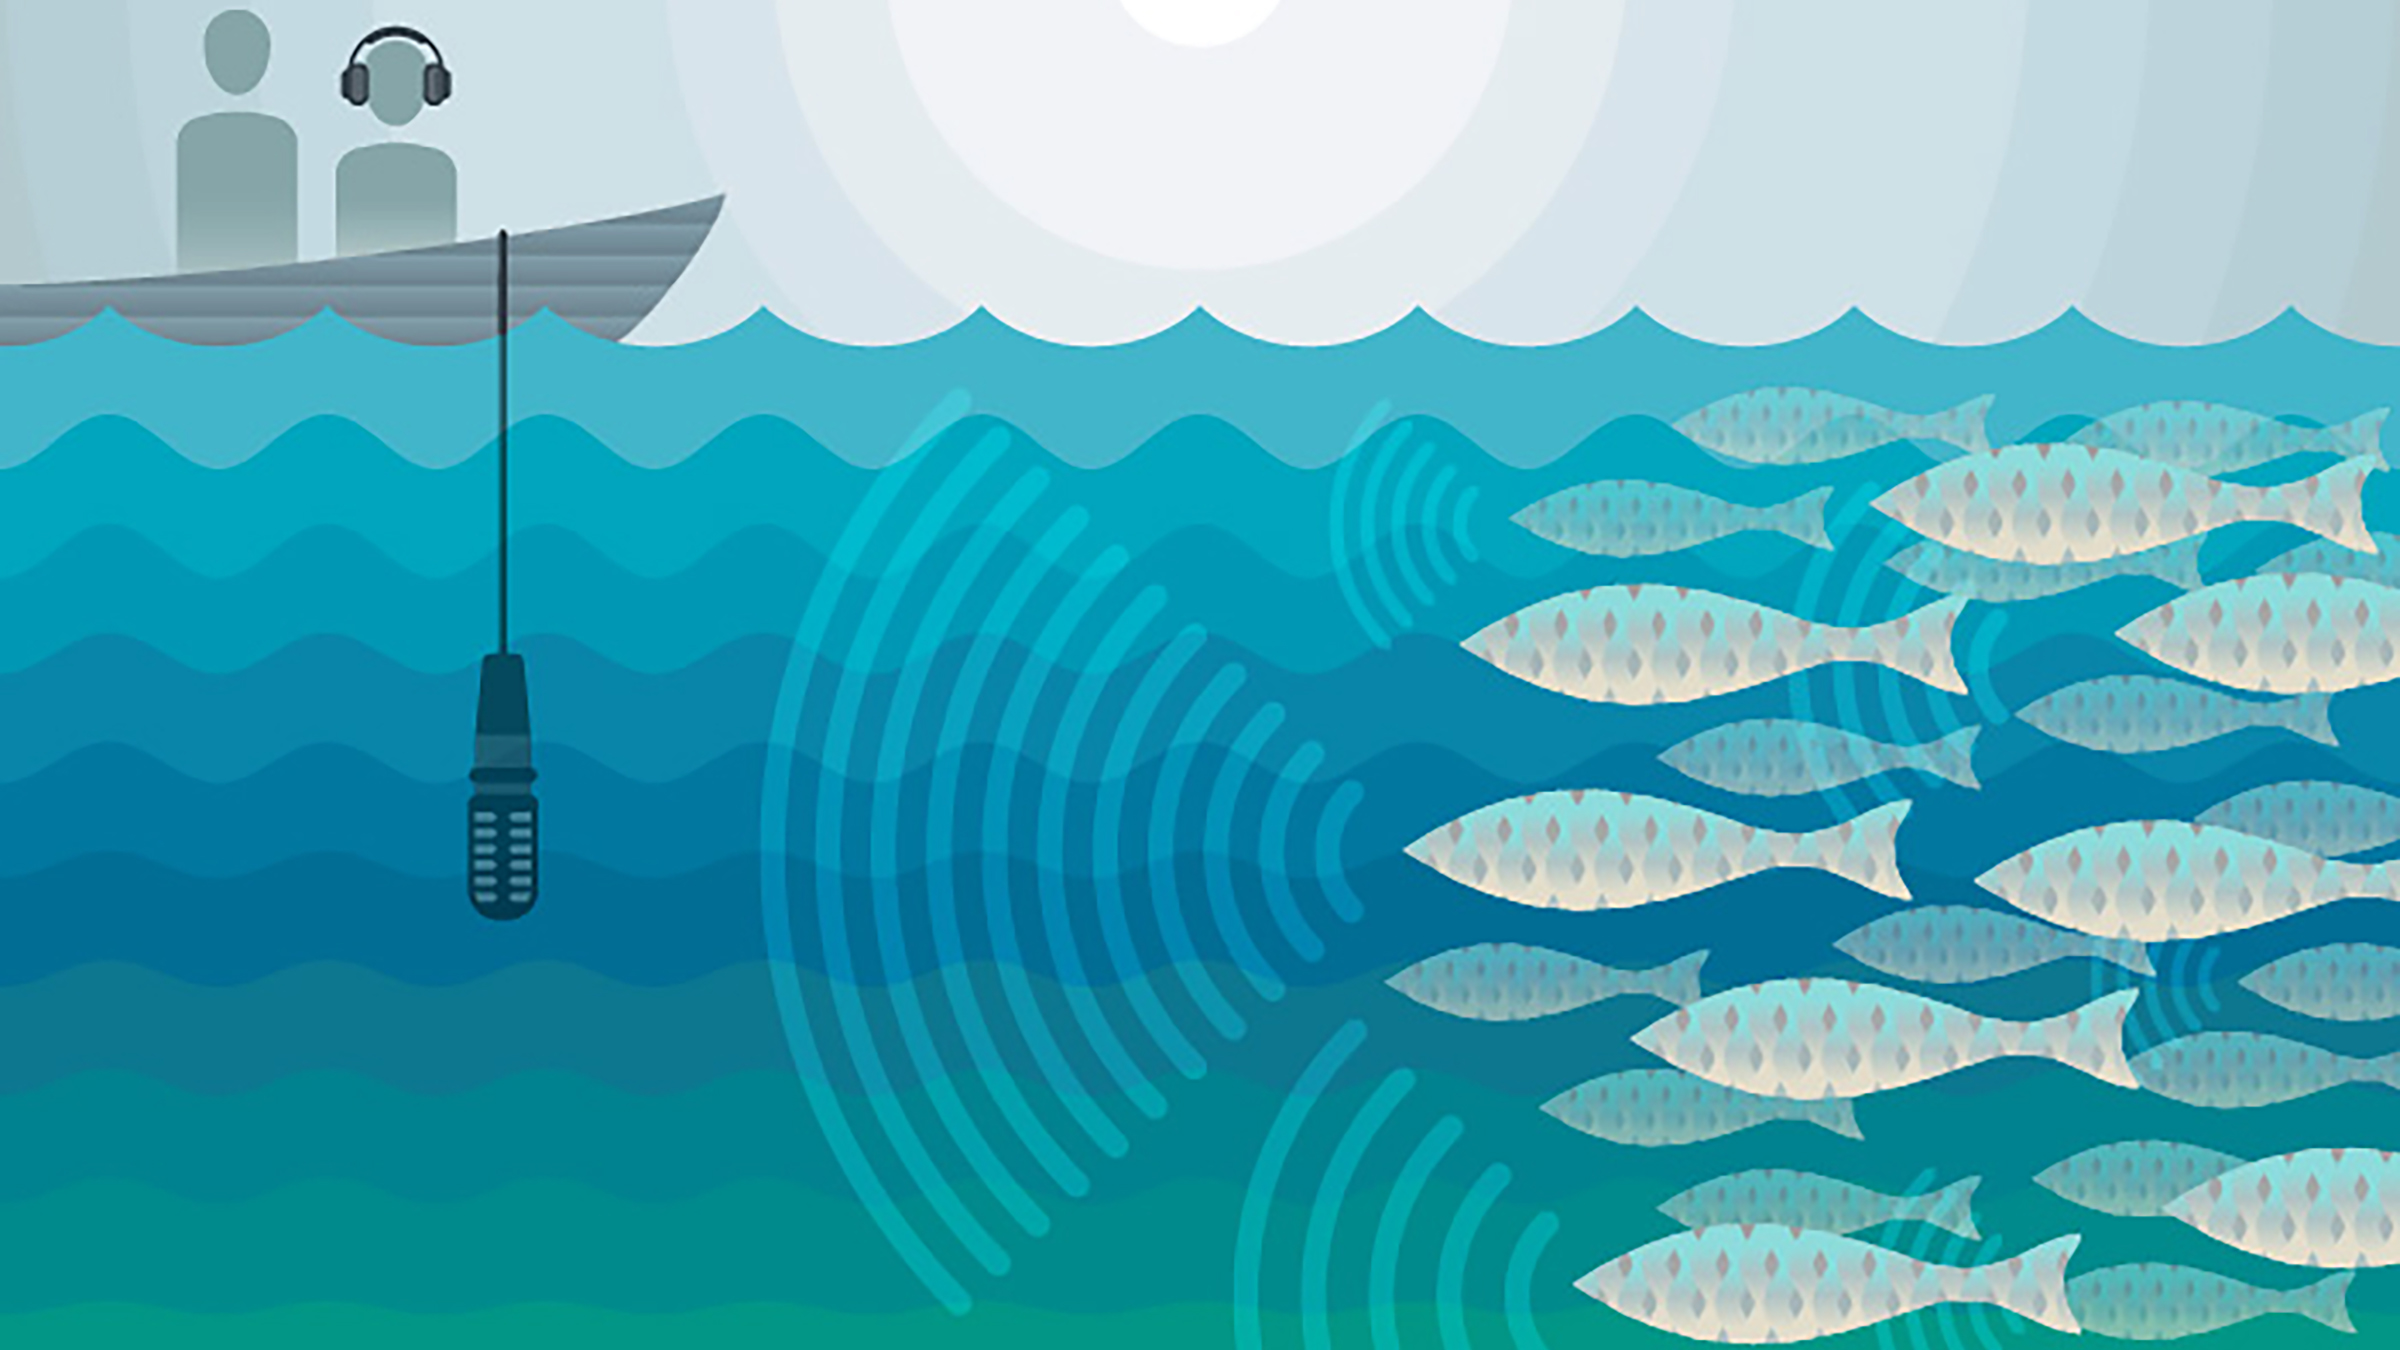 Illustration of people in a boat with a microphone dangling in the water and a group of fish emitting waves of sound